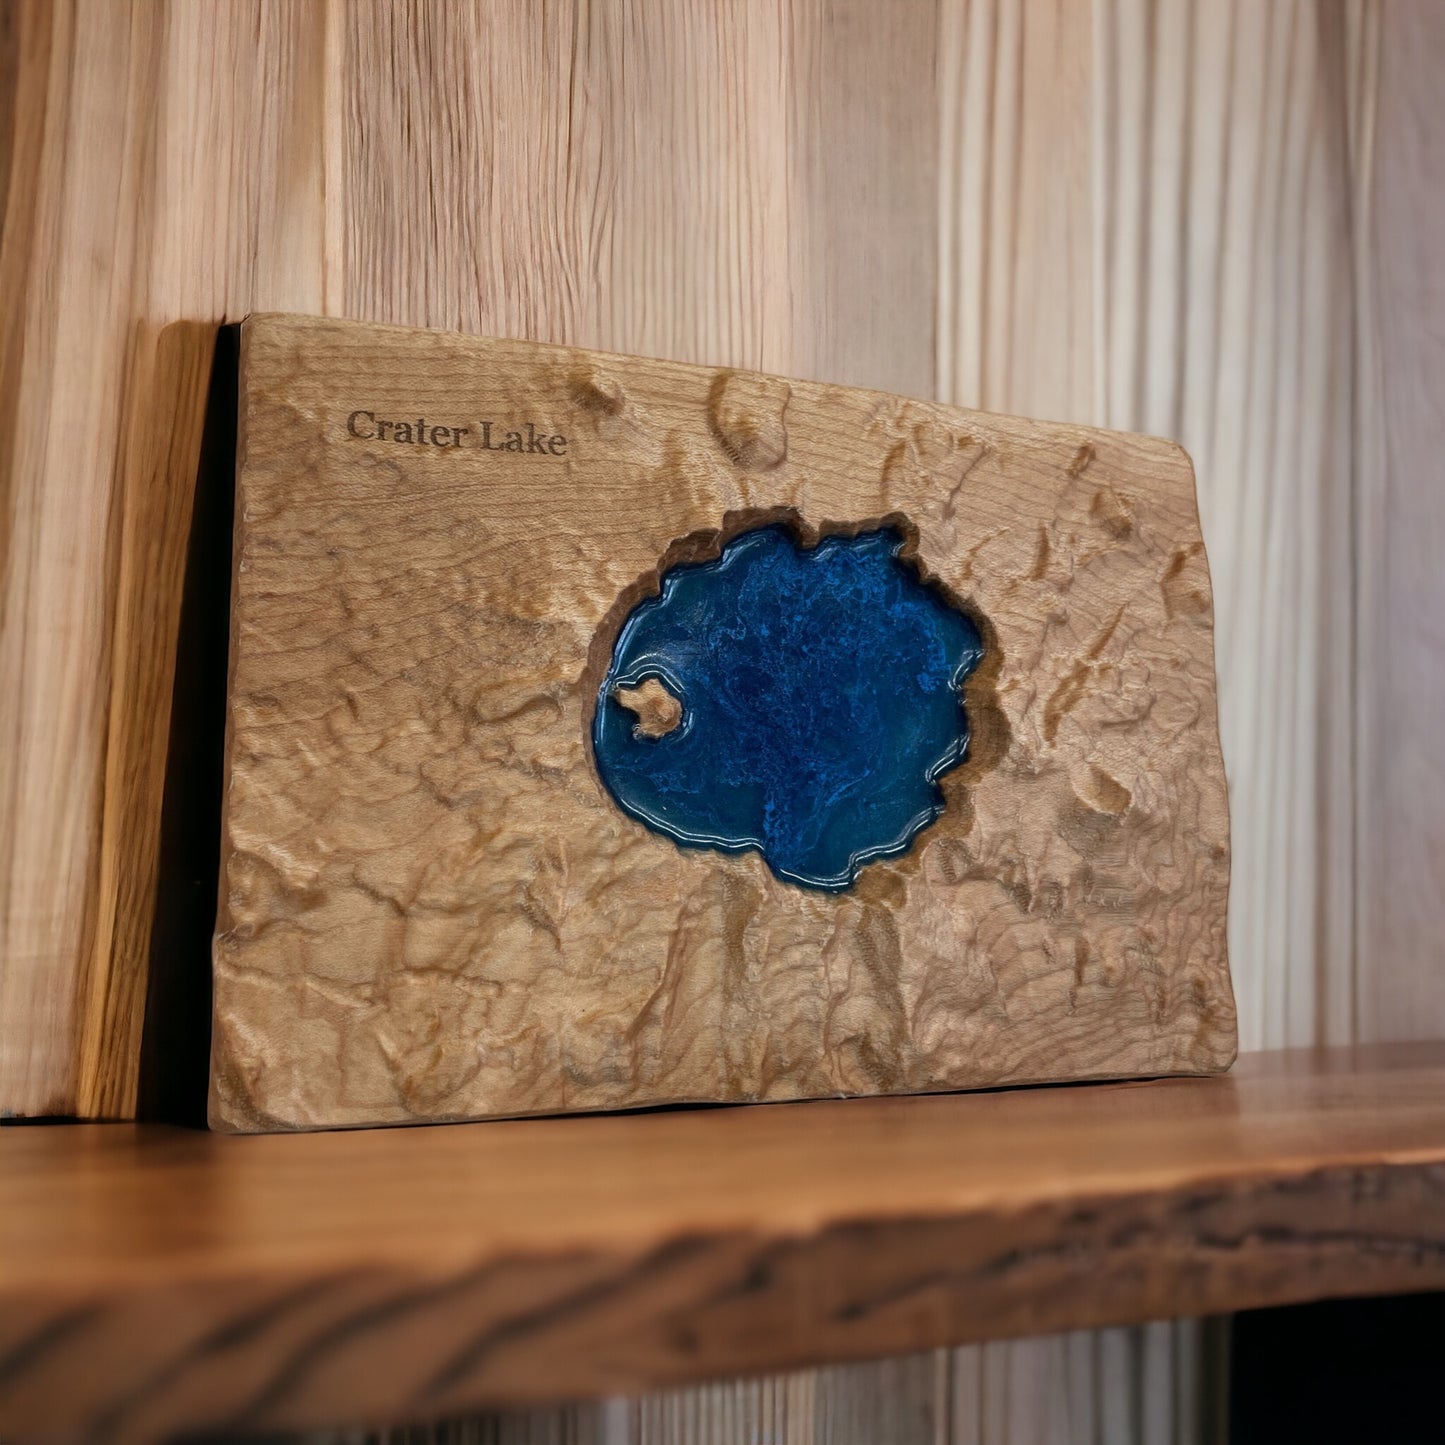 Crater Lake 3D Relief Map | Crater Lake Wood Epoxy Art | Crater Lake National Park Oregon | Travel Gift | Gift for Him | Crater Lake Gift